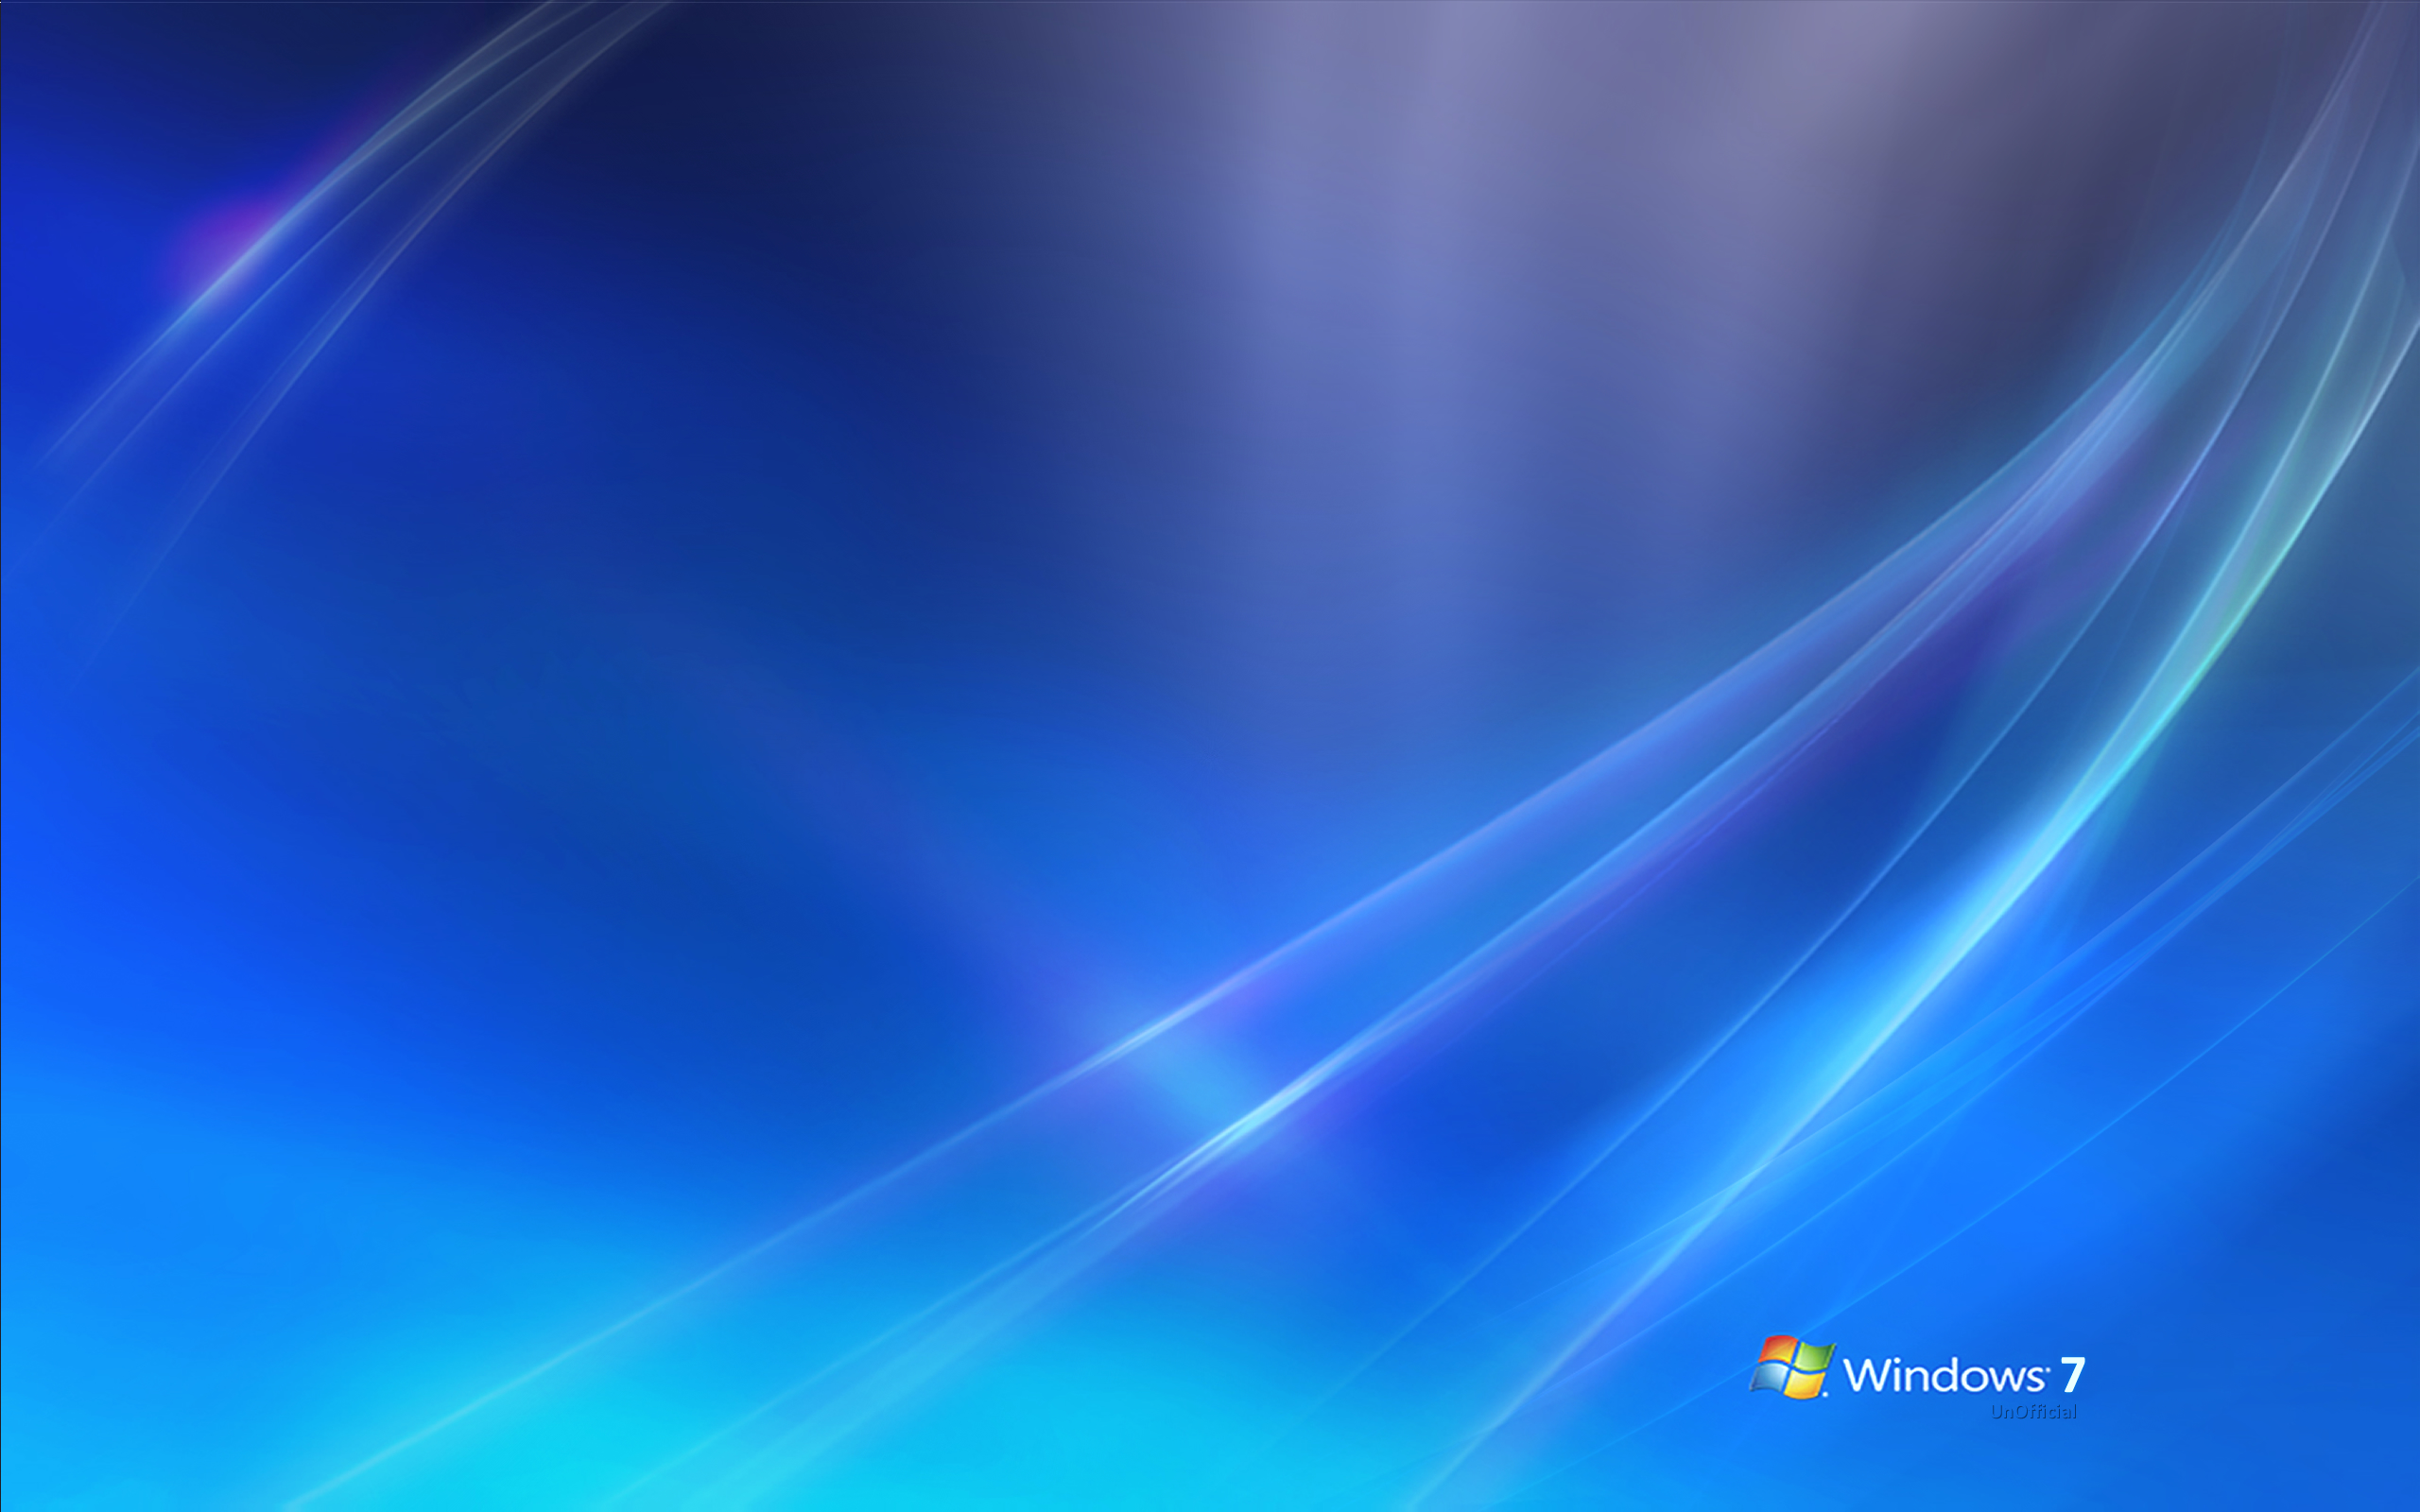 My previous post about Official Windows Wallpaper